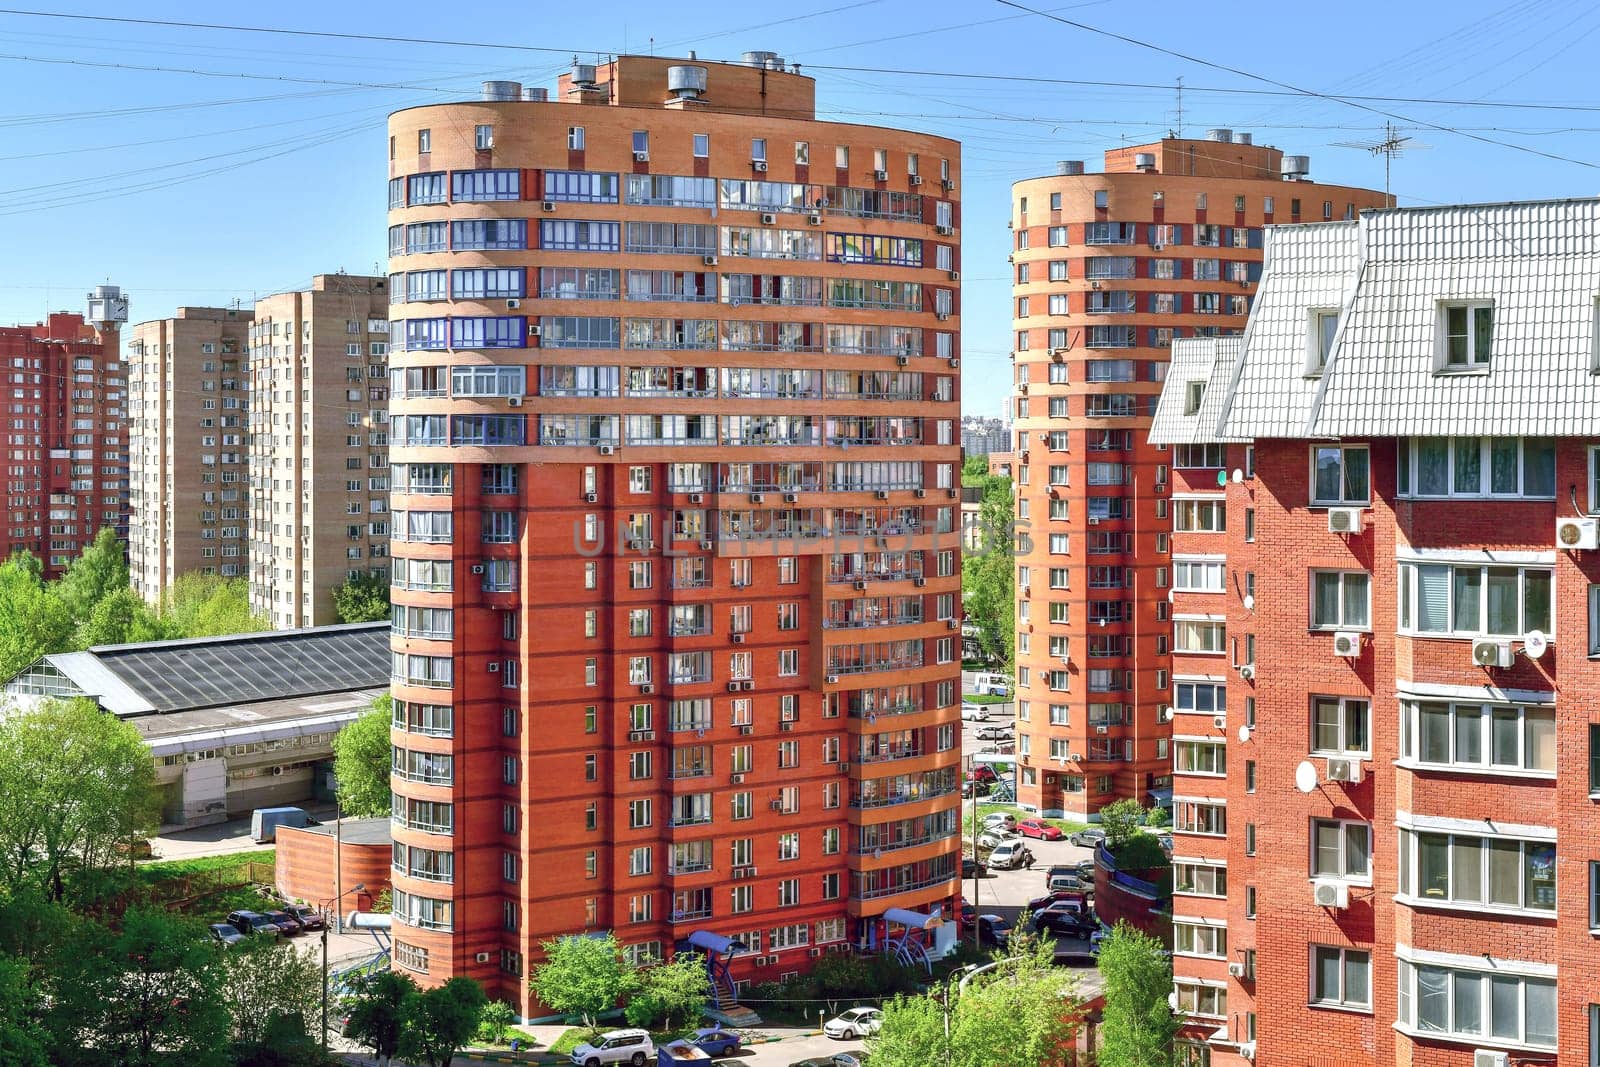 Khimki, Russia - May 10. 2018. Cityscape with the residential buildings, cars and road